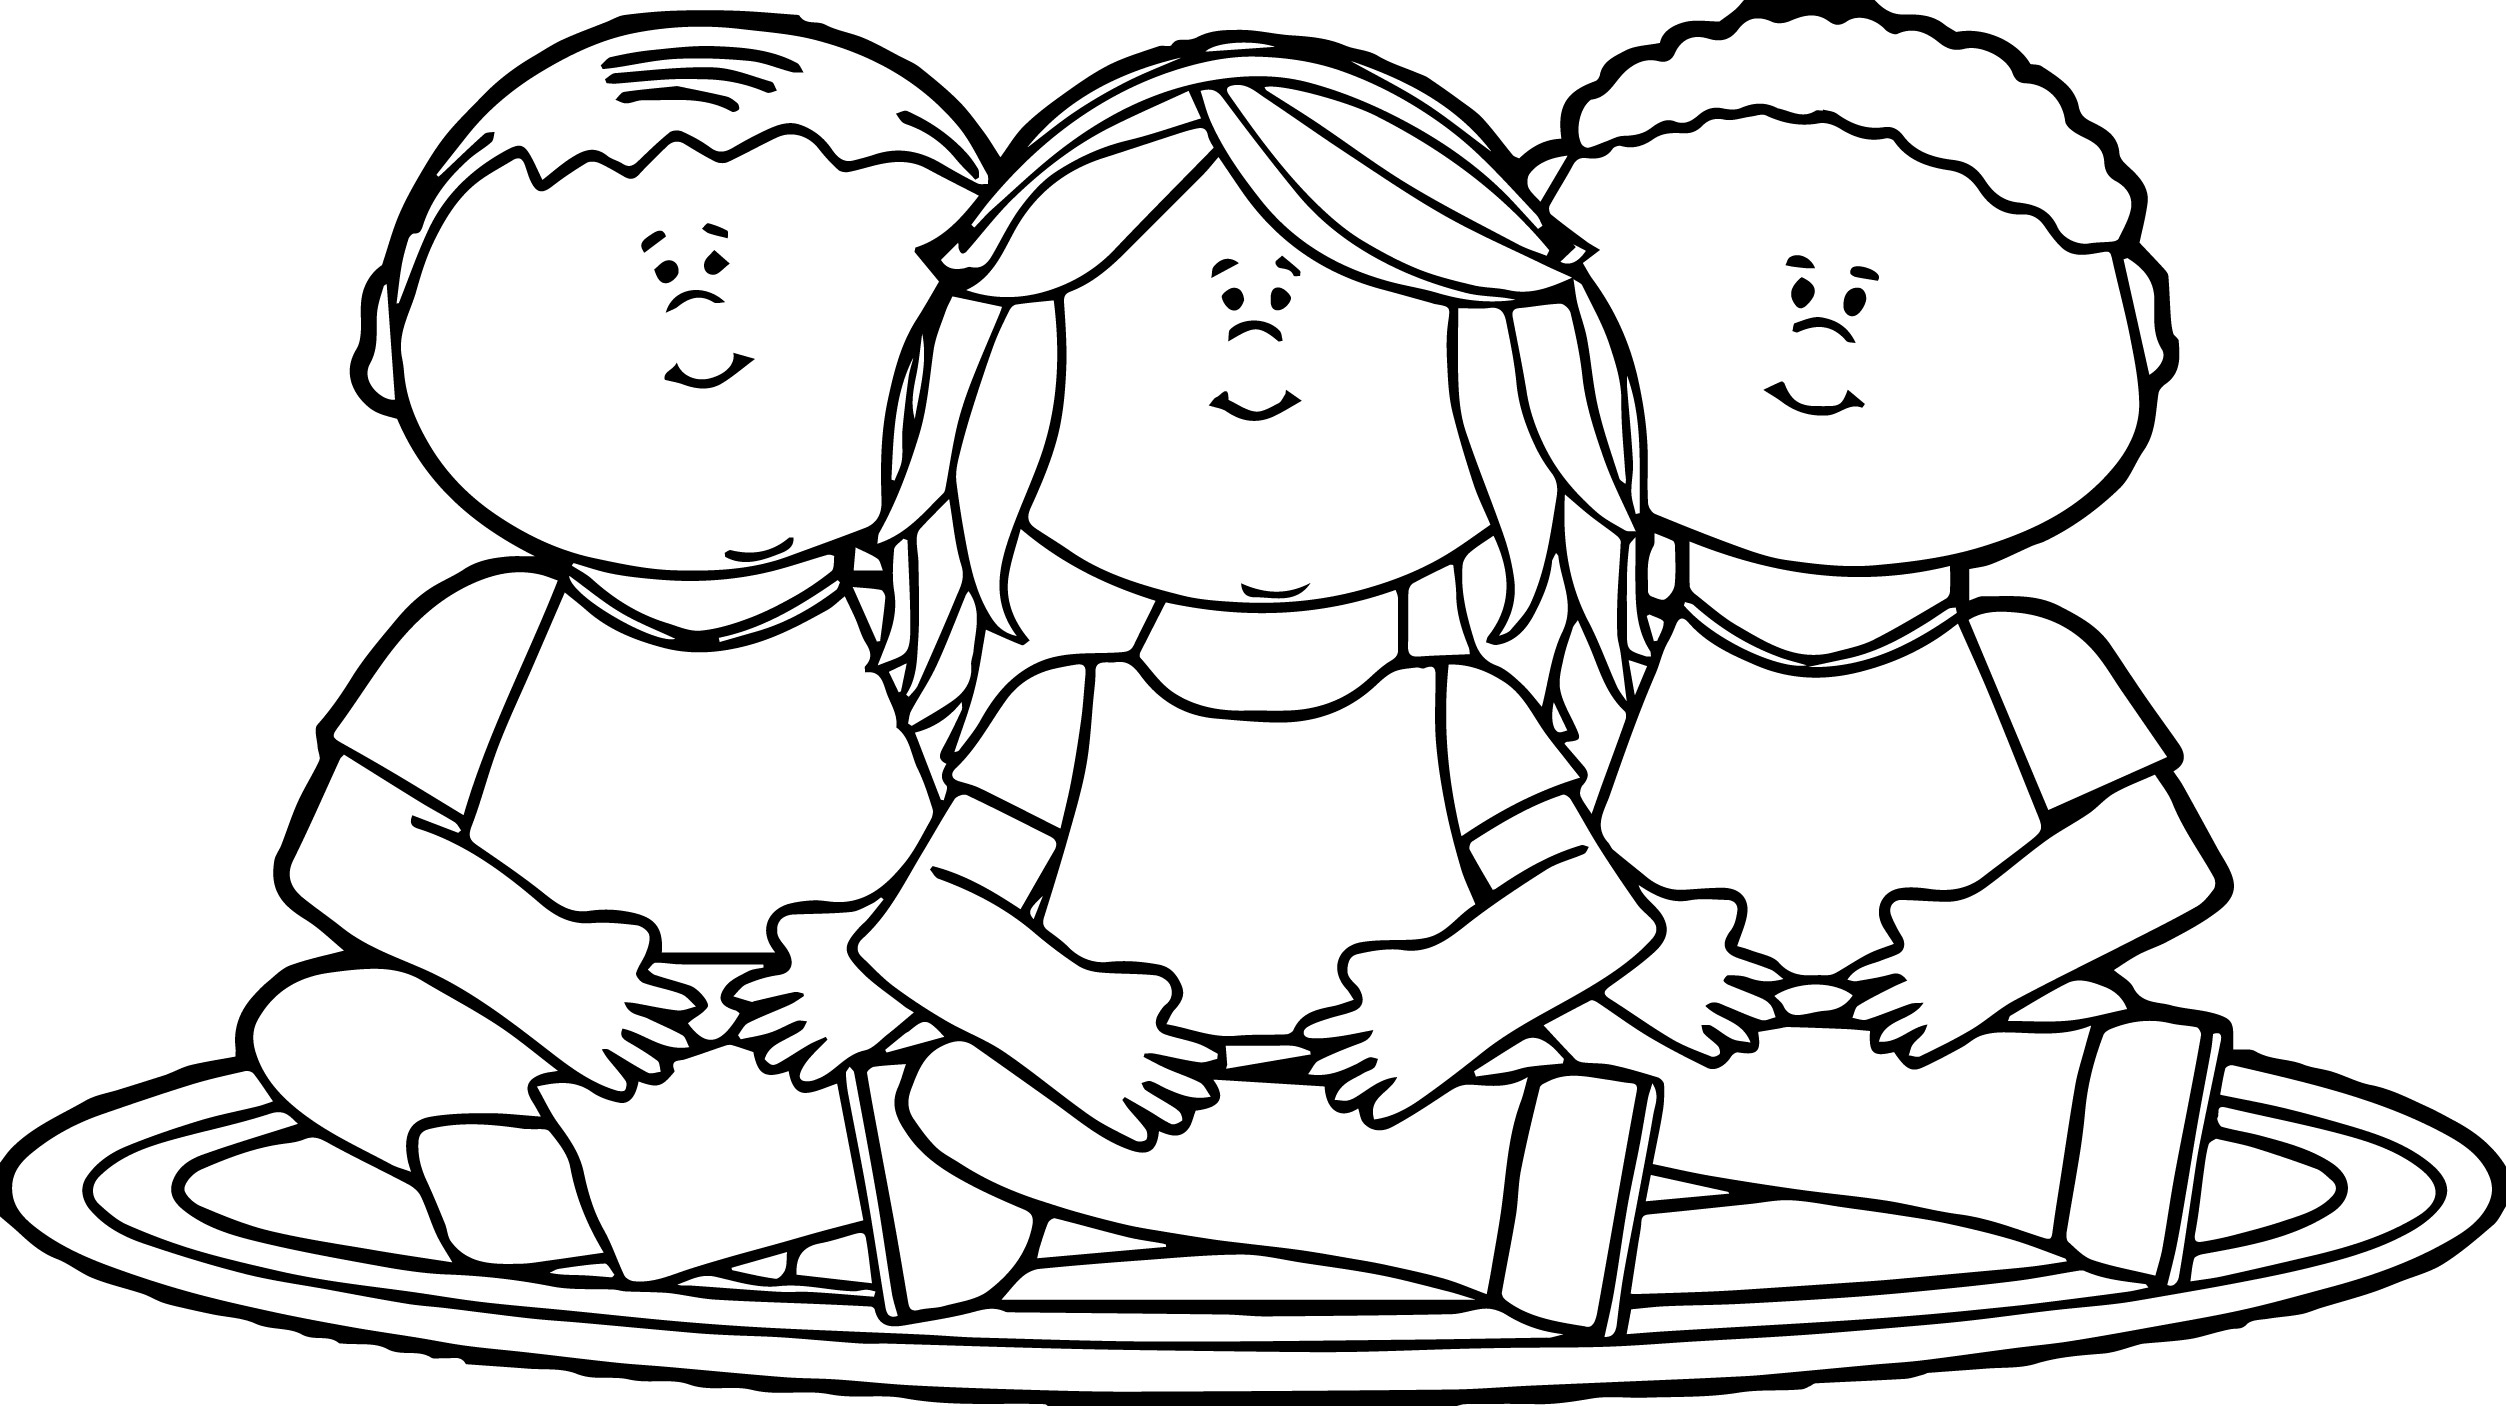 Kids Sitting On School Rug Kids Coloring Page | Wecoloringpage